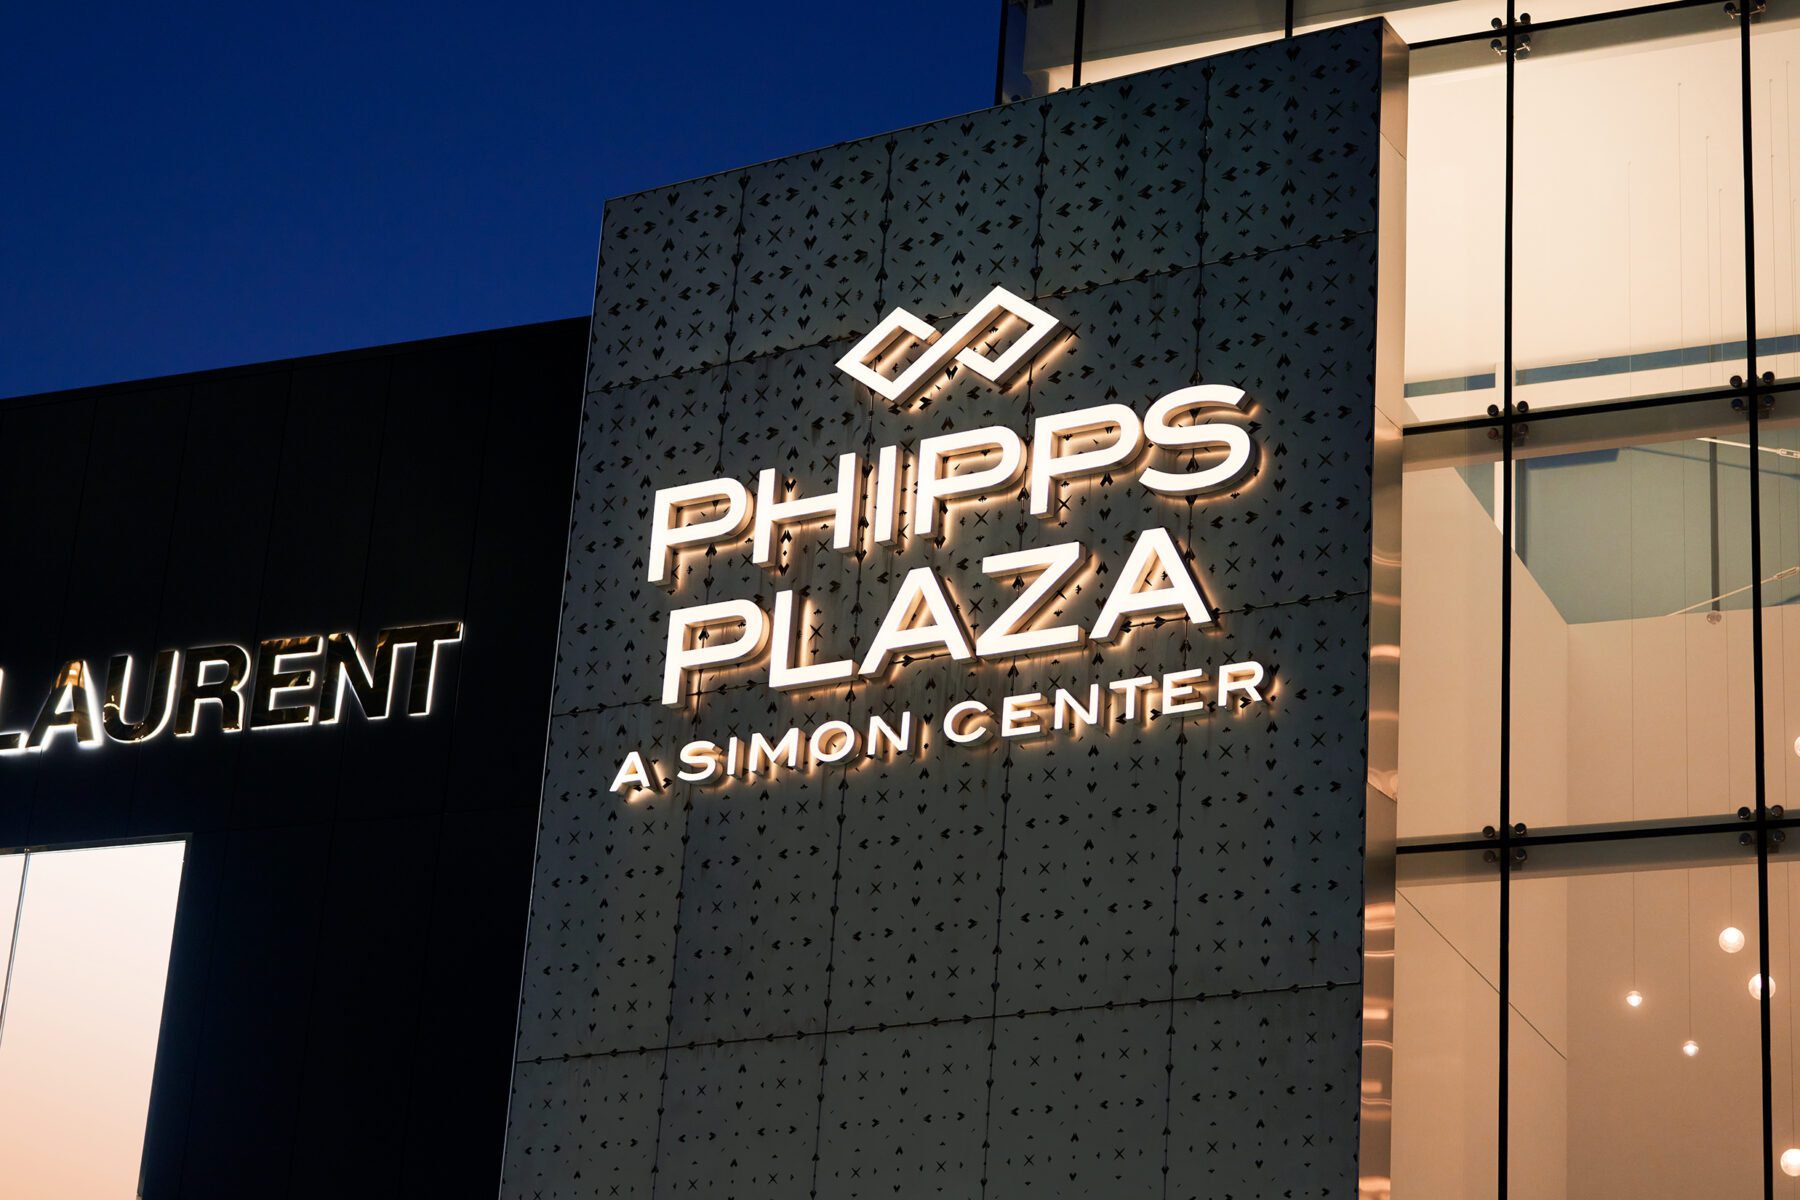 Discover The Premier Luxury Brands at Phipps Plaza - A Shopping